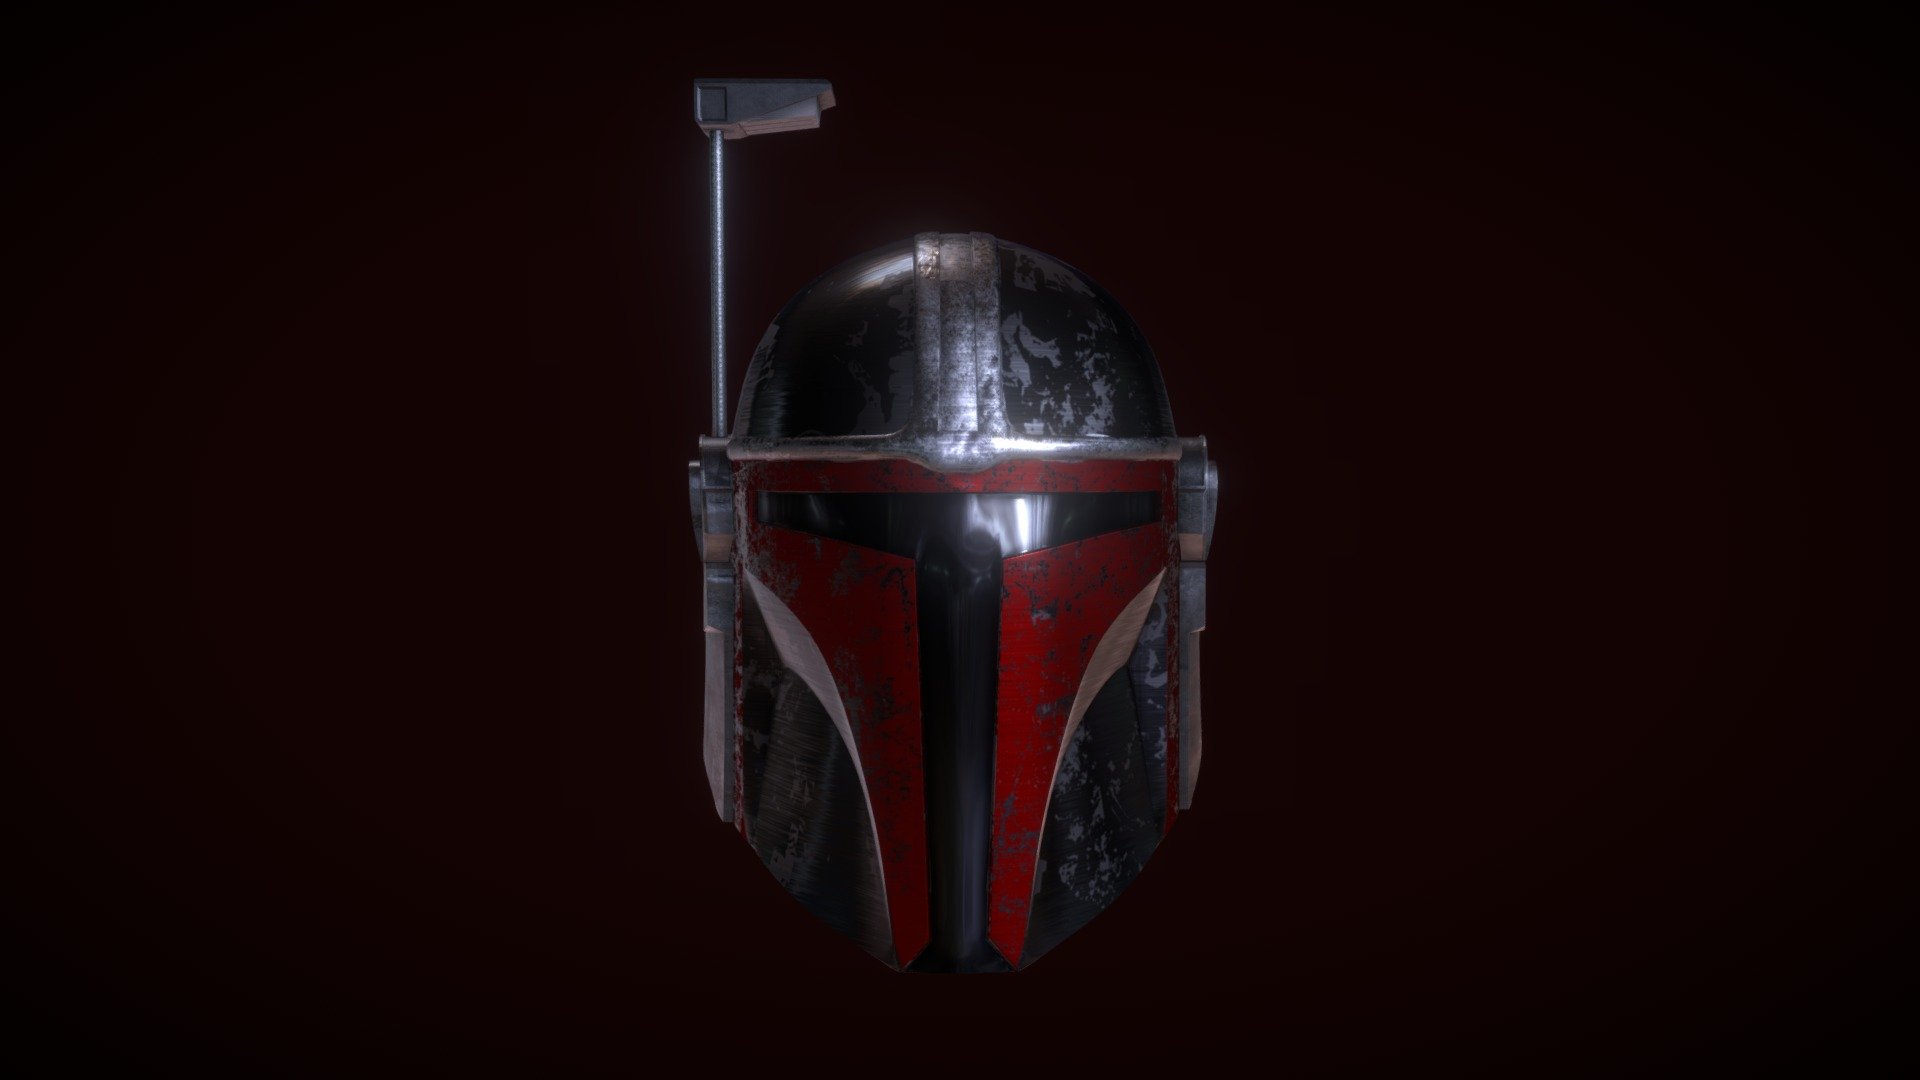 Since The Mandalorian series started and it's pretty cool I wanted to make my own Mandalorian helmet 3d model